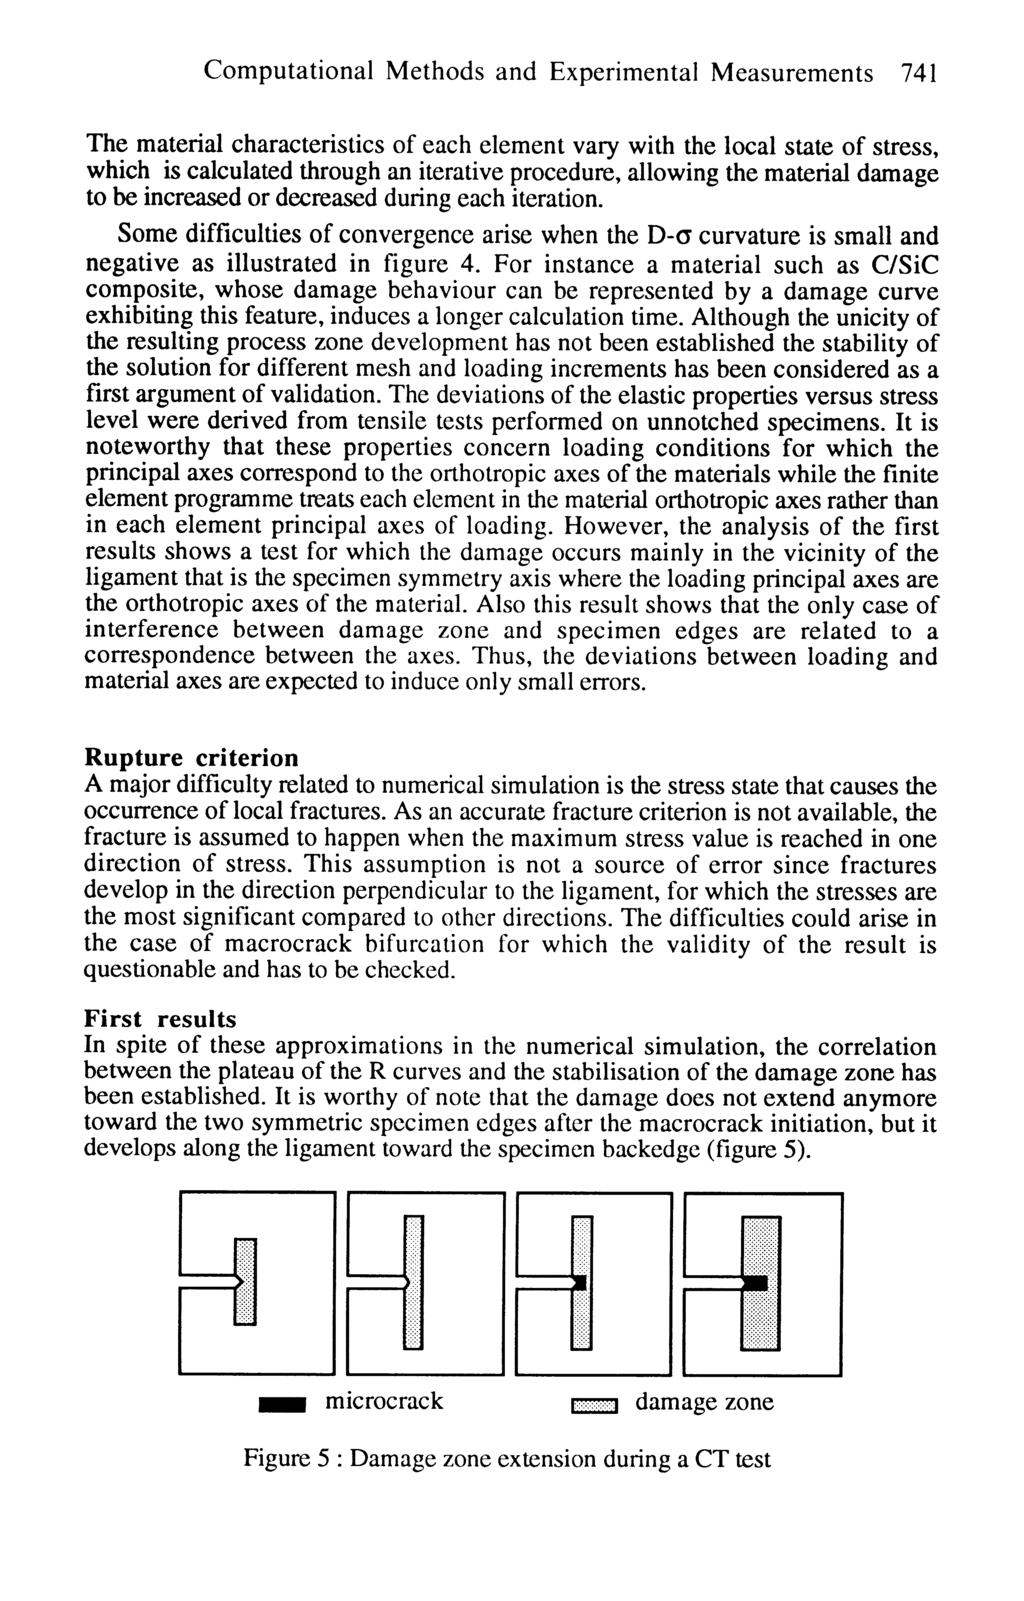 Computational Methods and Experimental Measurements 741 The material characteristics of each element vary with the local state of stress, which is calculated through an iterative procedure, allowing